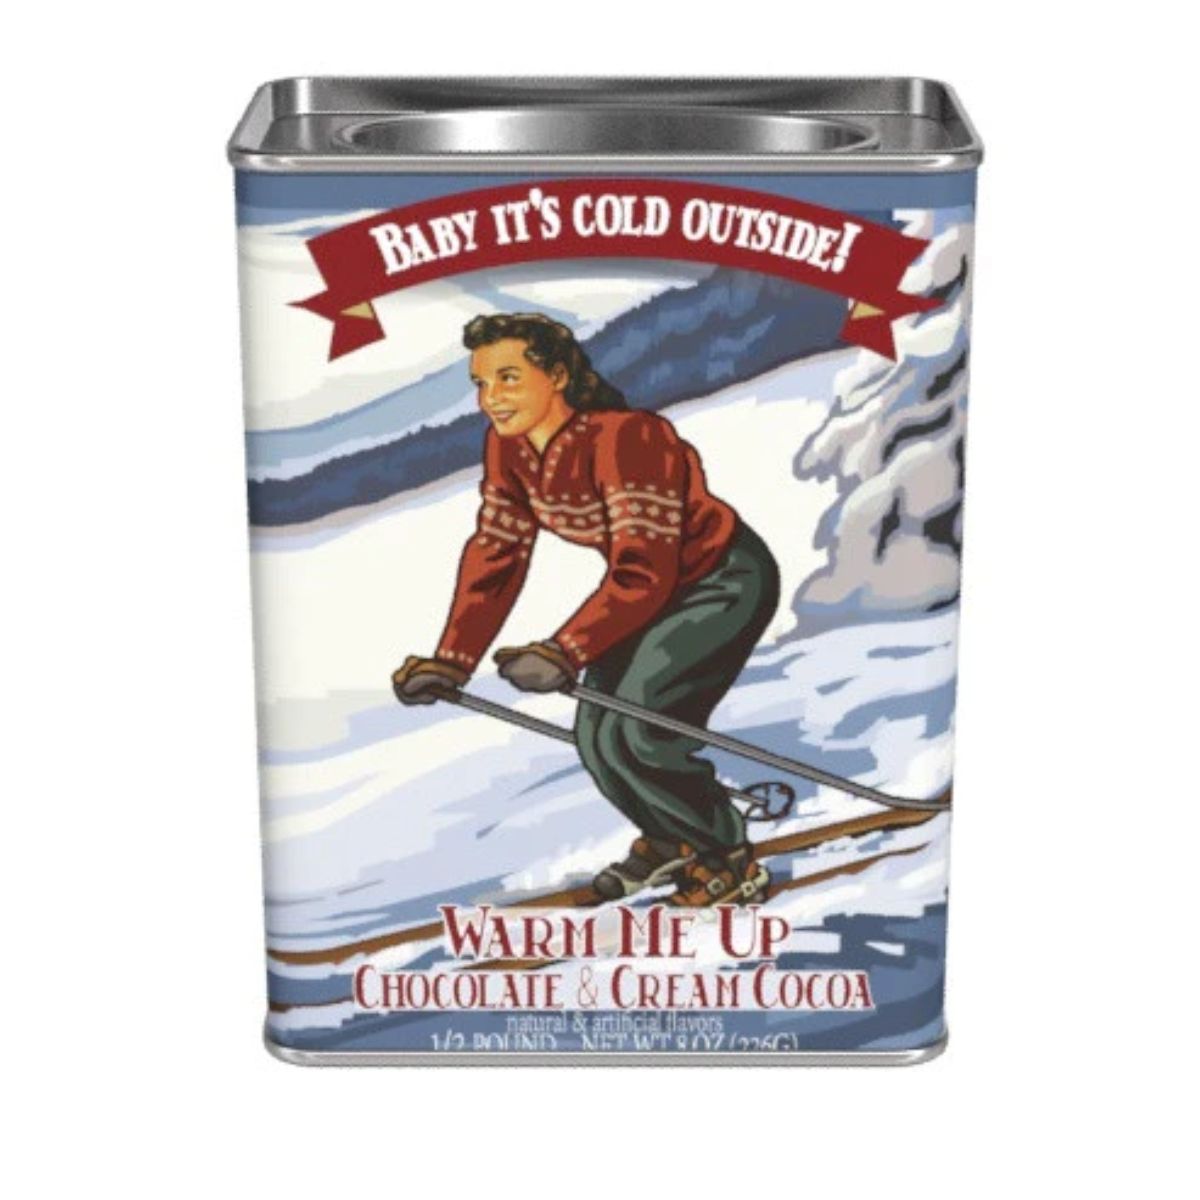 Baby Its Cold Outside Chocolate and Cream Cocoa Mix in 8 oz nostalic tin